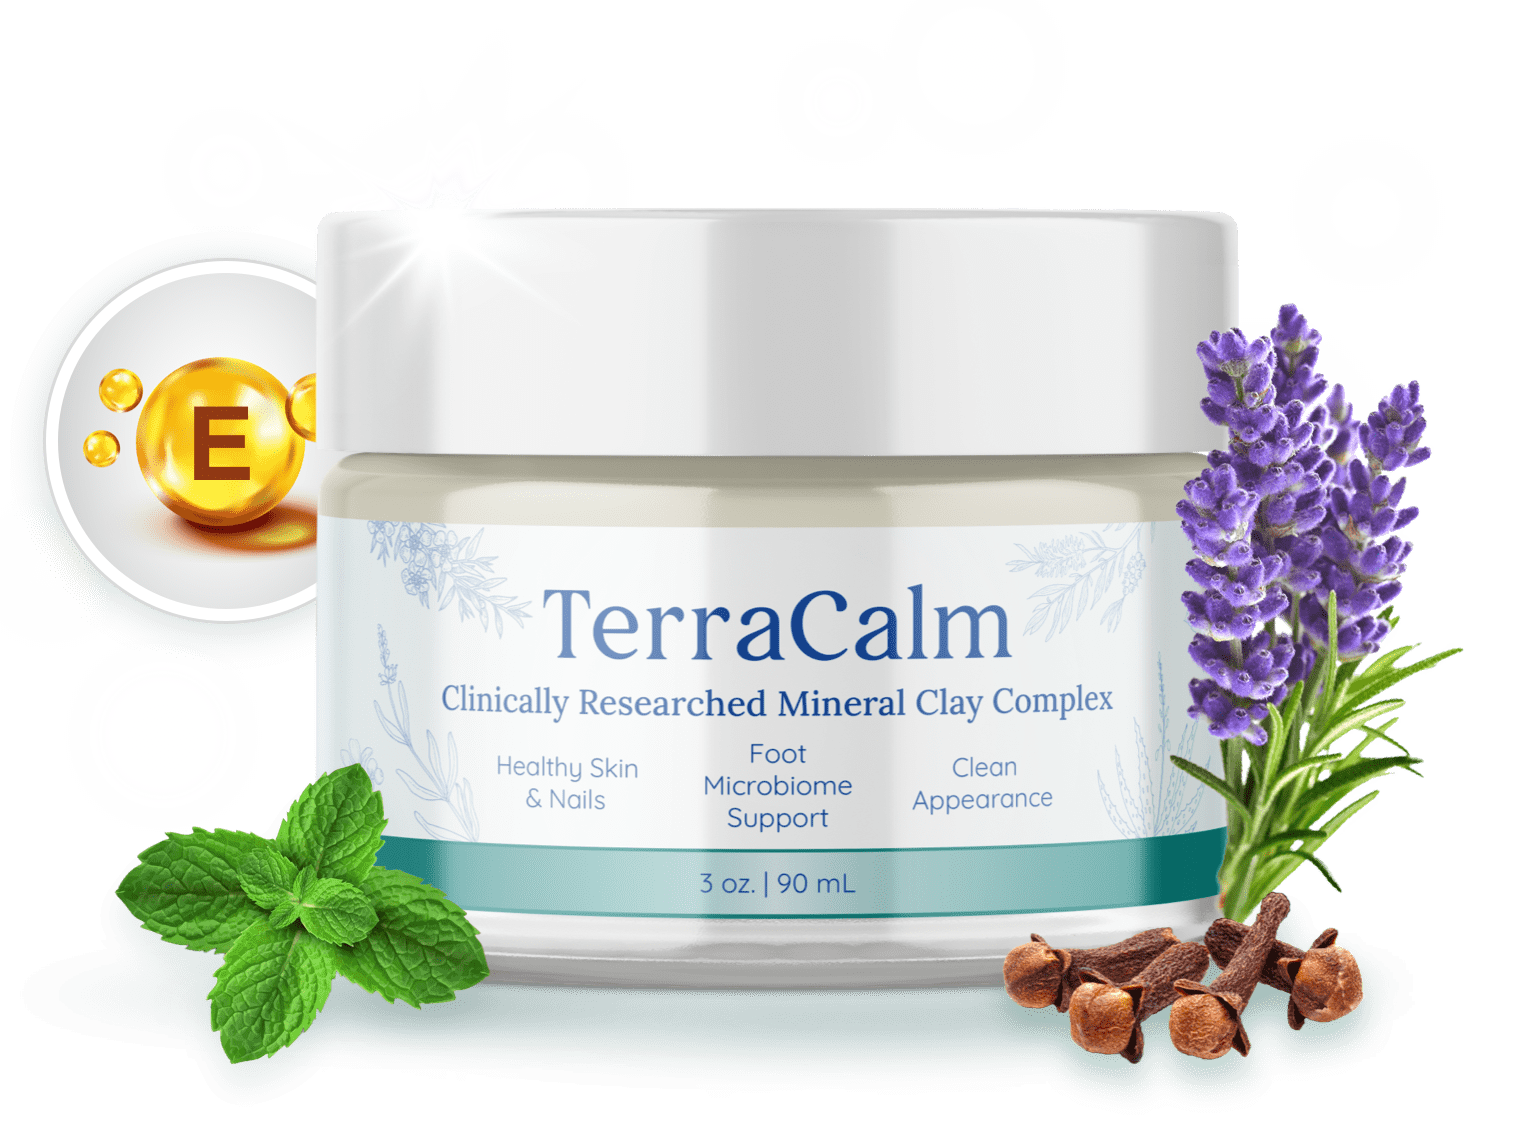 Say goodbye to earaches with TerraCalm's natural formula